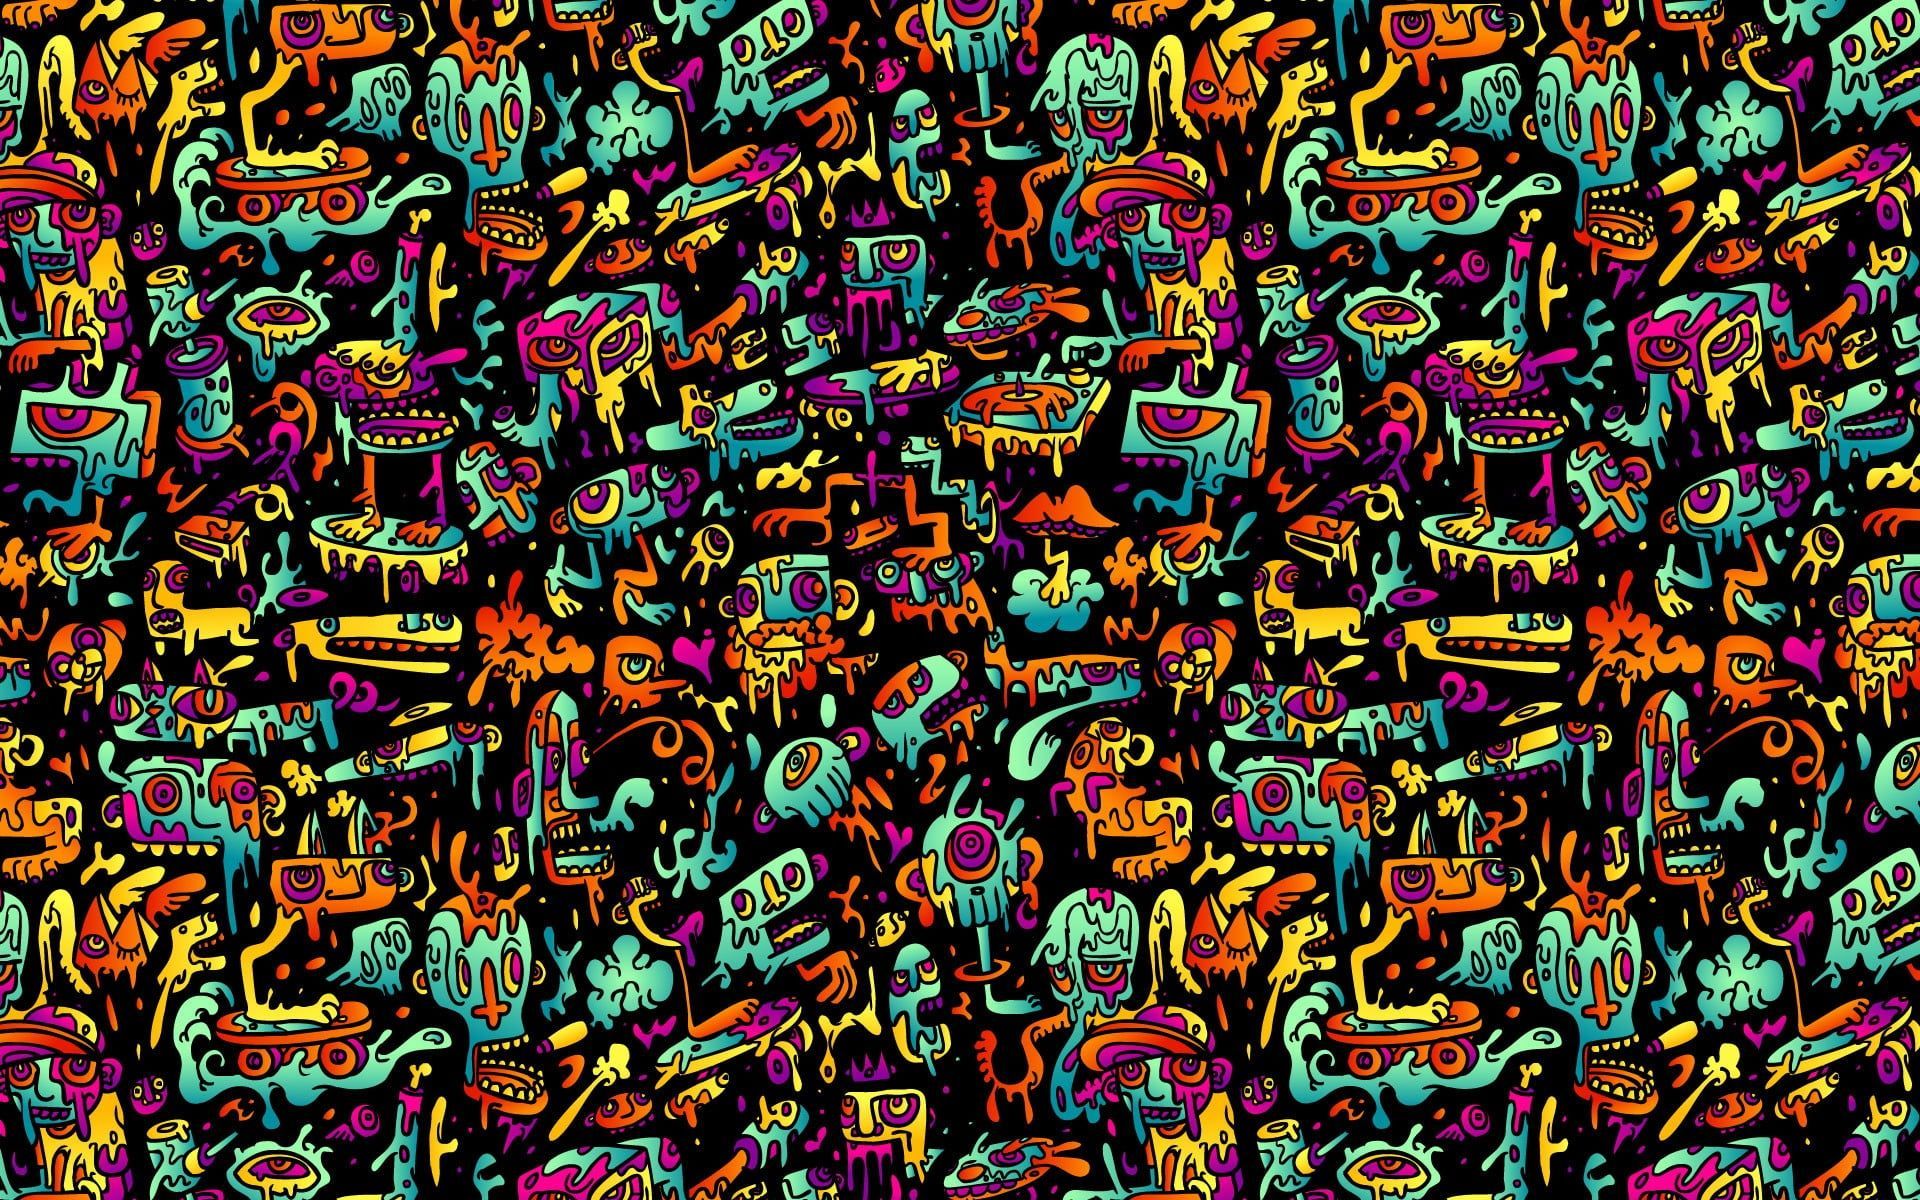 multicolored doodle wallpaper #abstract #colorful P #wallpaper #hdwallpaper #desktop. Abstract wallpaper, Wallpaper doodle, Wallpaper picture